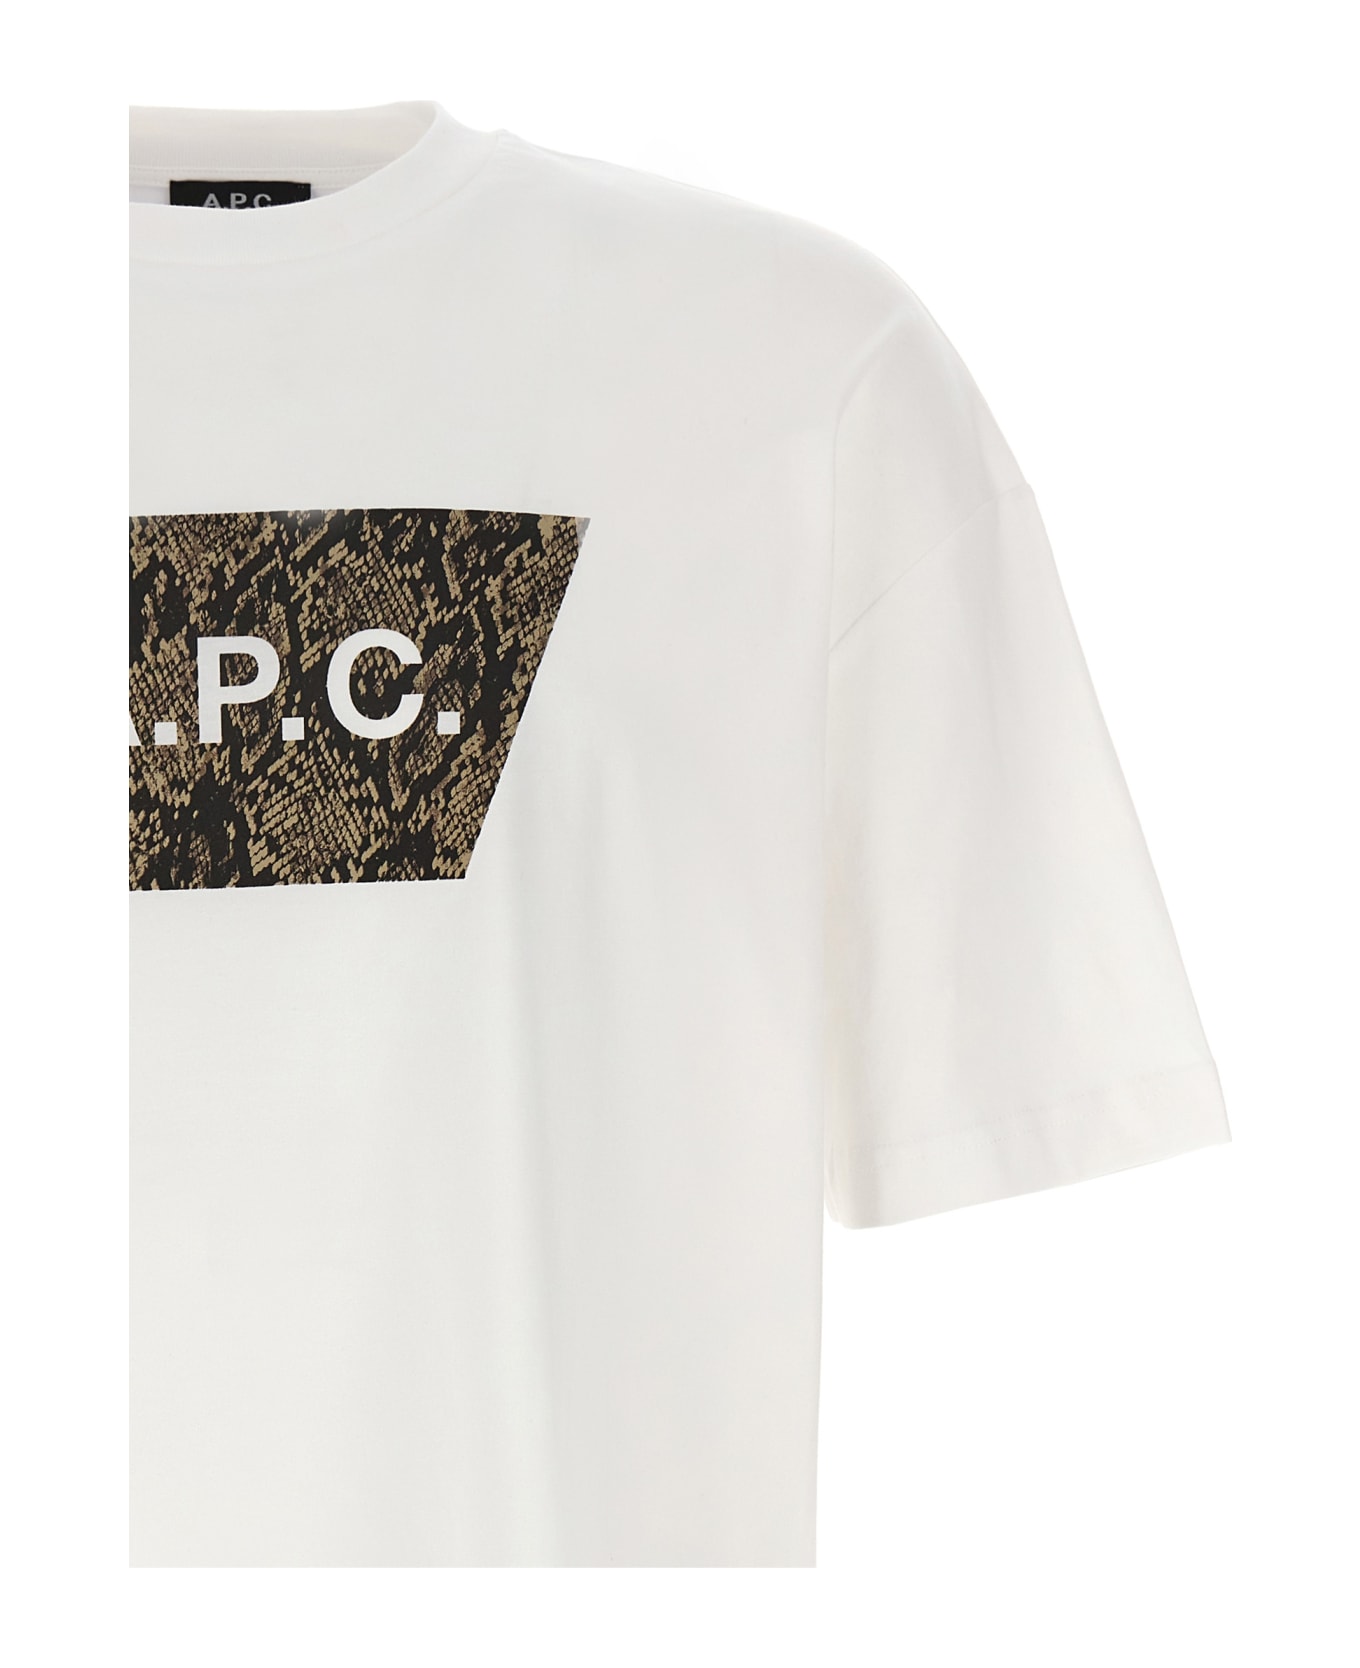 A.P.C. T-shirts And Polos - White シャツ